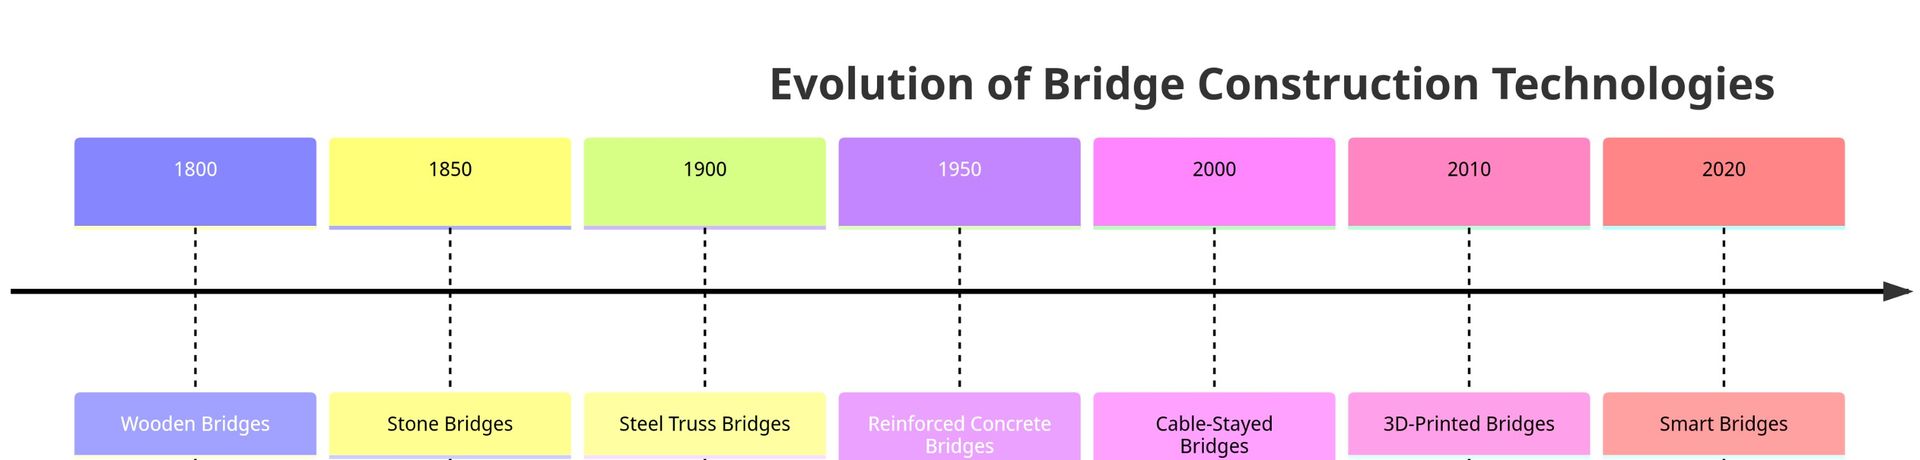 This timeline chart showcases the evolution of bridge construction technologies over the years, starting from wooden bridges in the 1800s to the smart bridges of today.